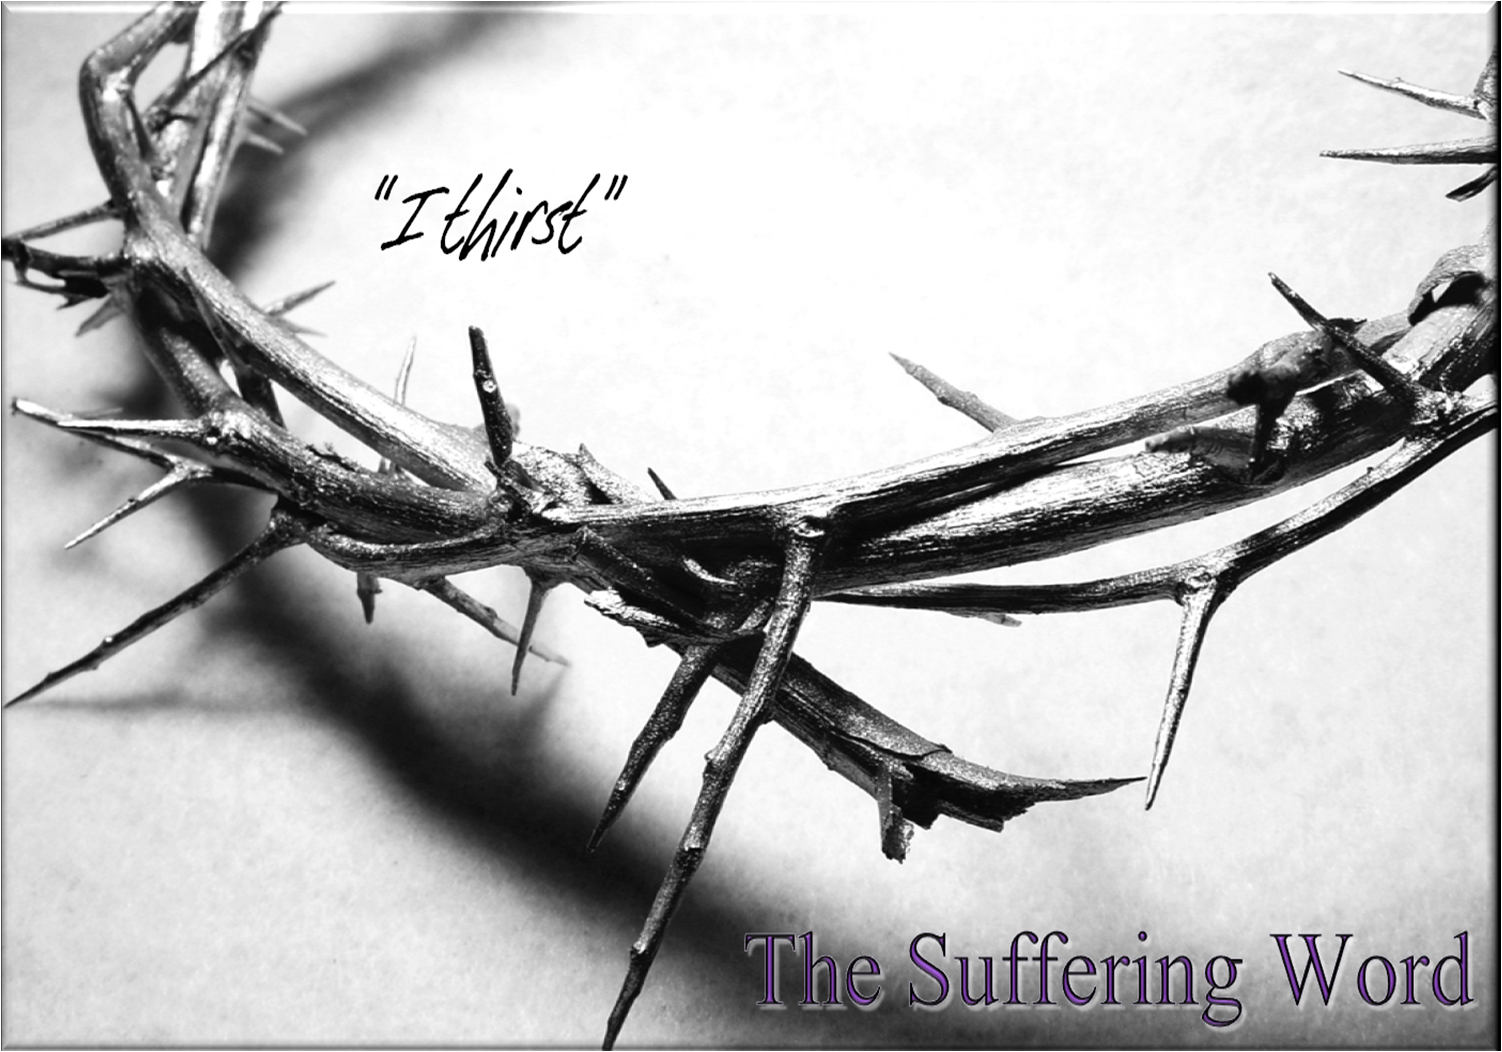 "The Suffering Word"